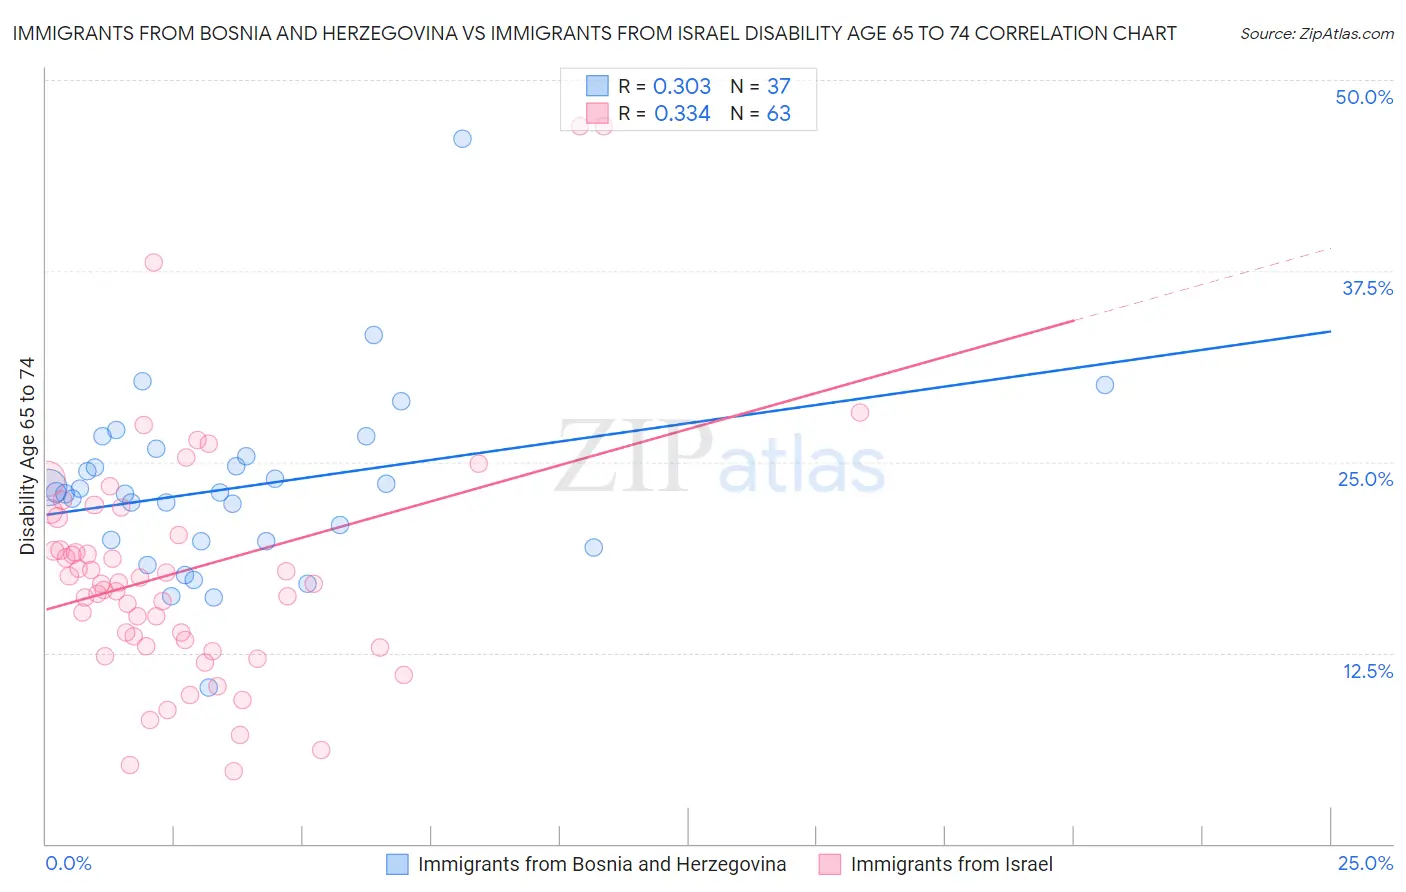 Immigrants from Bosnia and Herzegovina vs Immigrants from Israel Disability Age 65 to 74